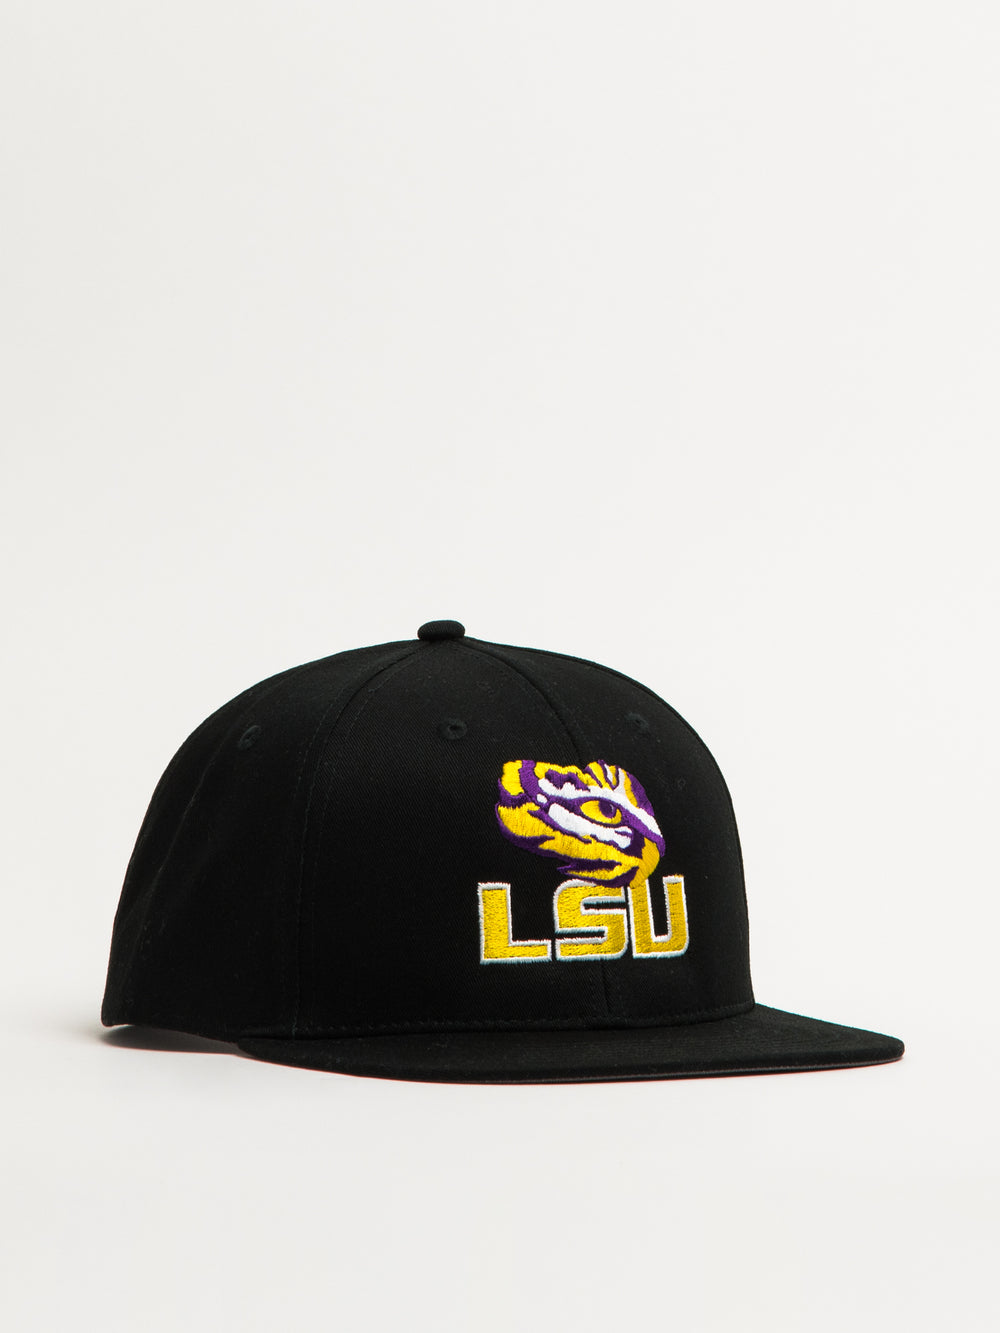 AHEAD LSU PATCH FOX STRUCTURED SNAPBACK